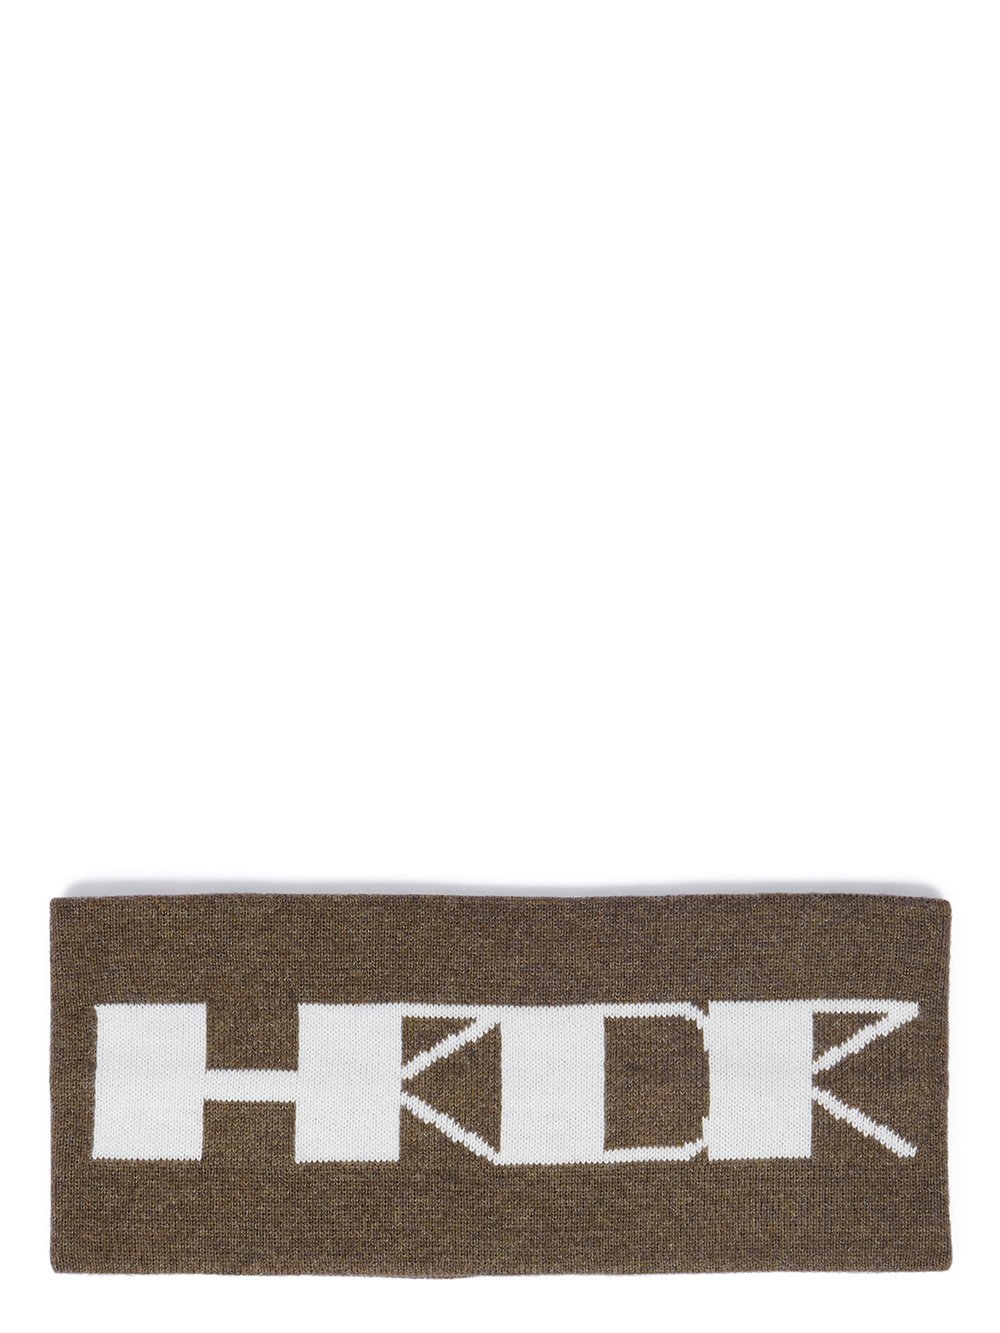 RICK OWENS FW23 LUXOR HRDR HEADBAND IN DUST AND MILK COTTON KNIT